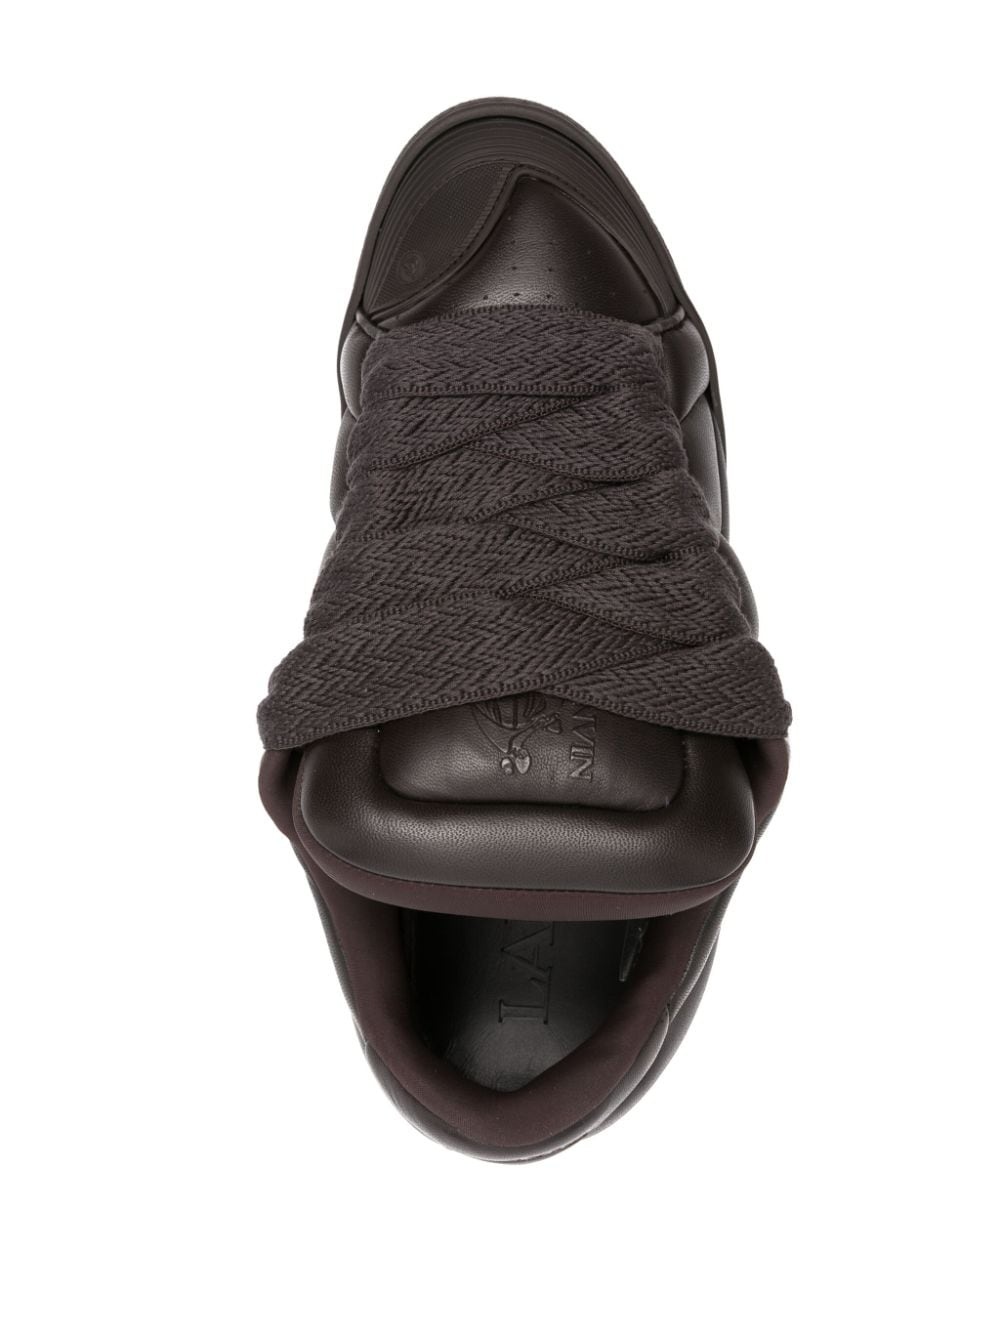 Curb XL leather sneakers - 4